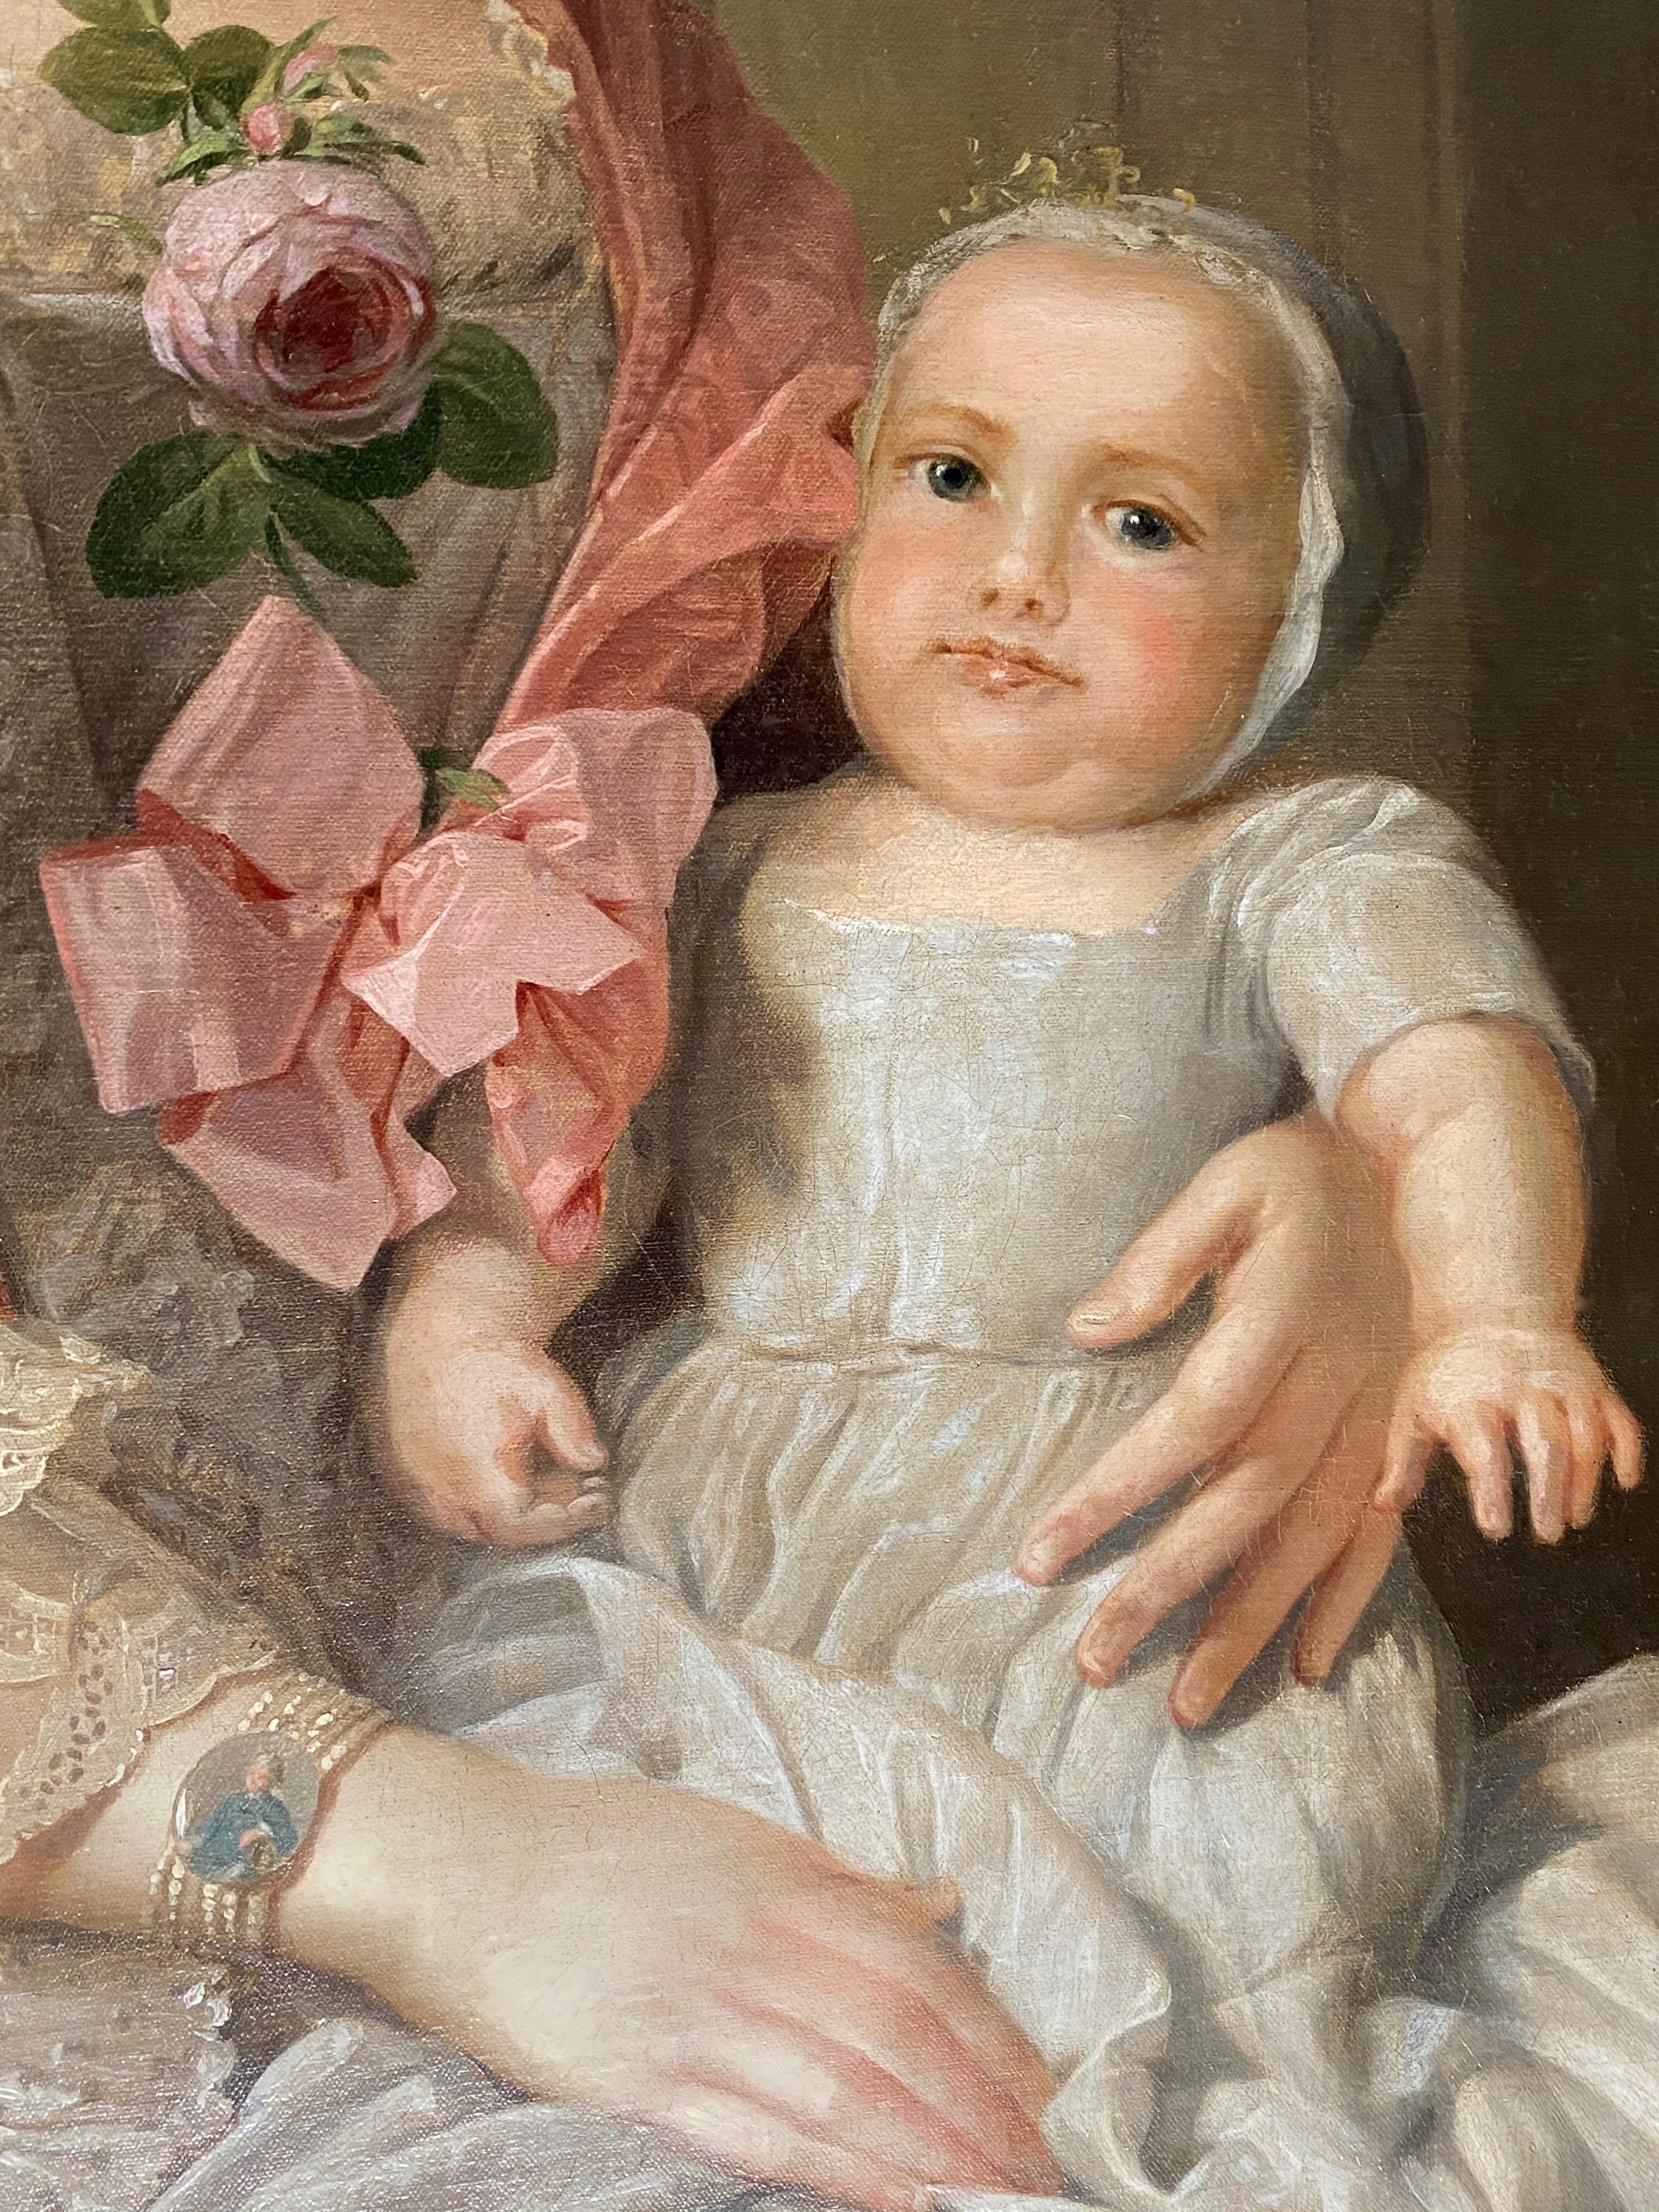 18th Century English Portrait of a Lady and her Child. - Old Masters Painting by Studio of Sir Allan Ramsay